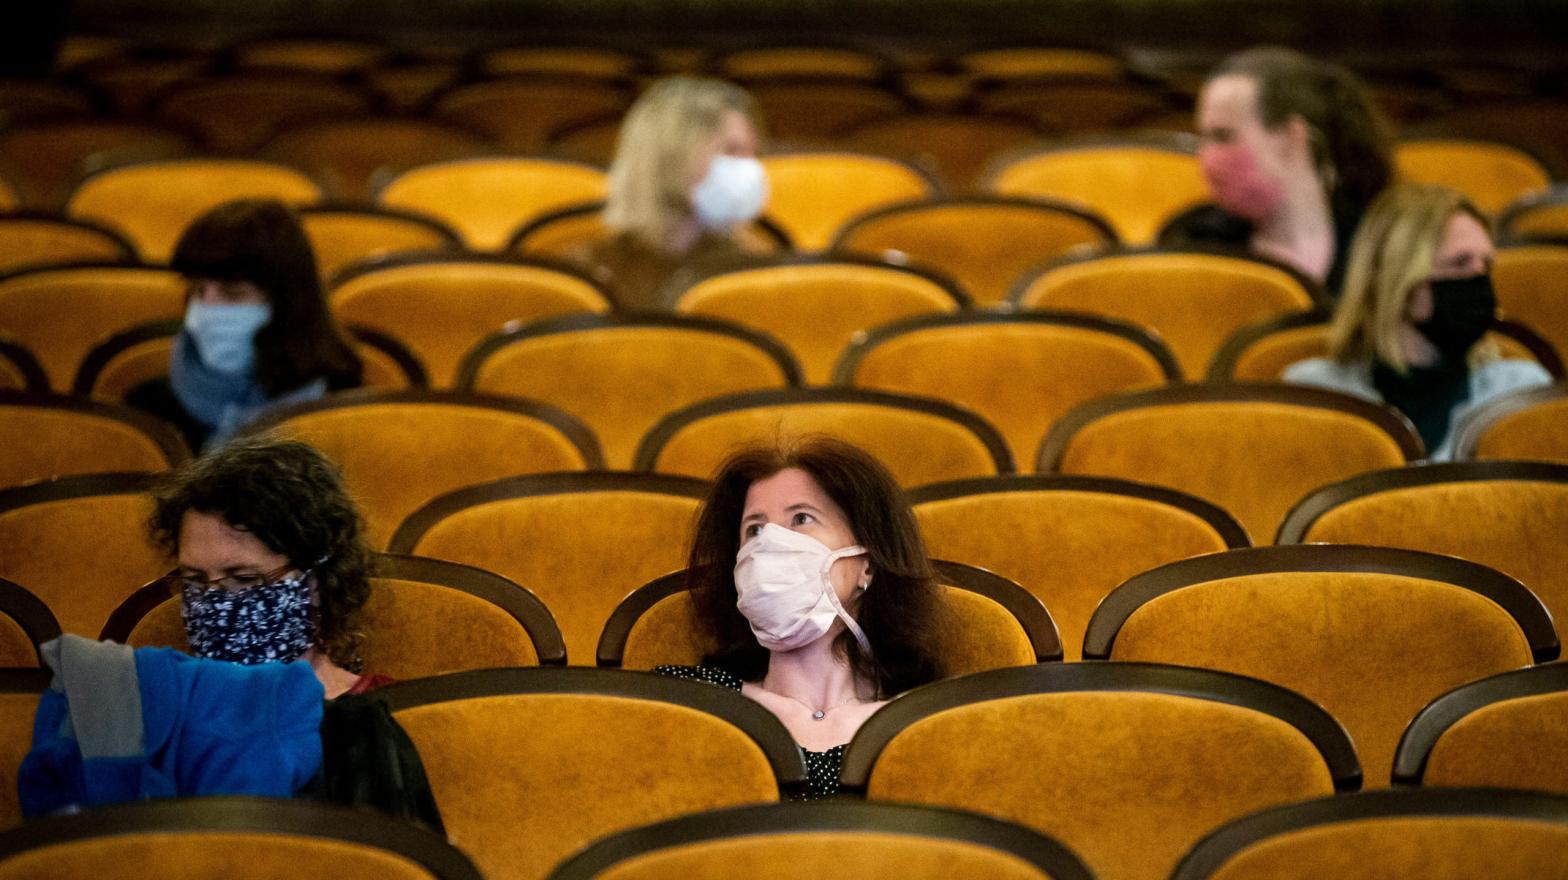 Customers wearing protective masks sit apart in observance of social distancing measures inside a movie theatre as the Czech government lifted more restrictions allowing cinemas to re-open on May 11, 2020, in Prague, Czech Republic. (Image: Getty)